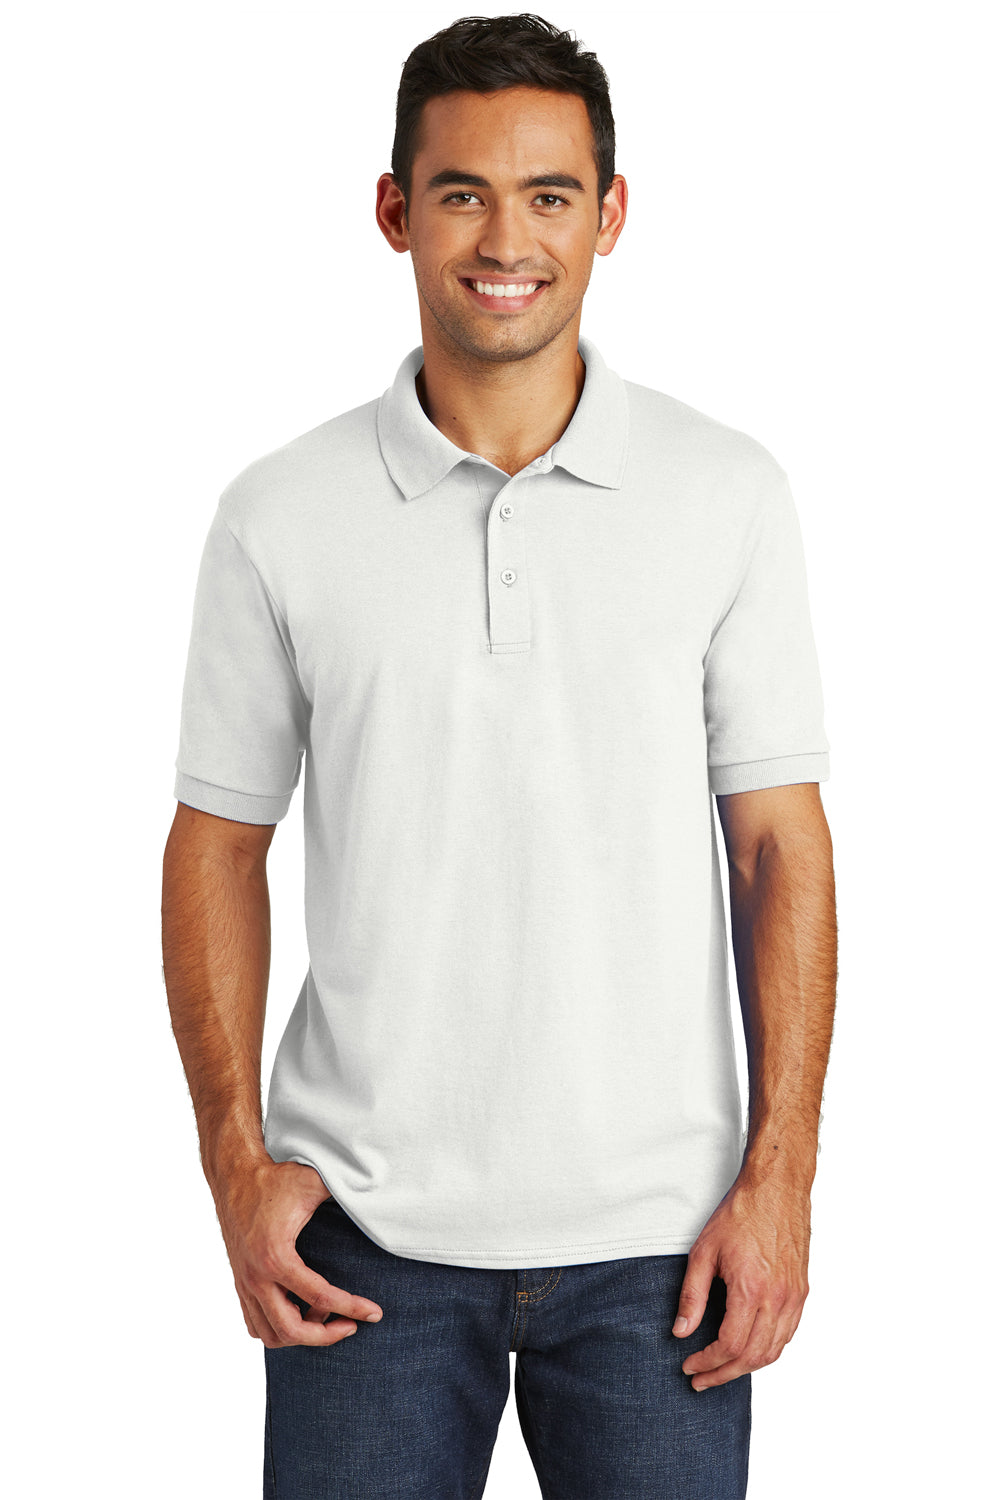 Port & Company KP55 Mens Core Stain Resistant Short Sleeve Polo Shirt White Front